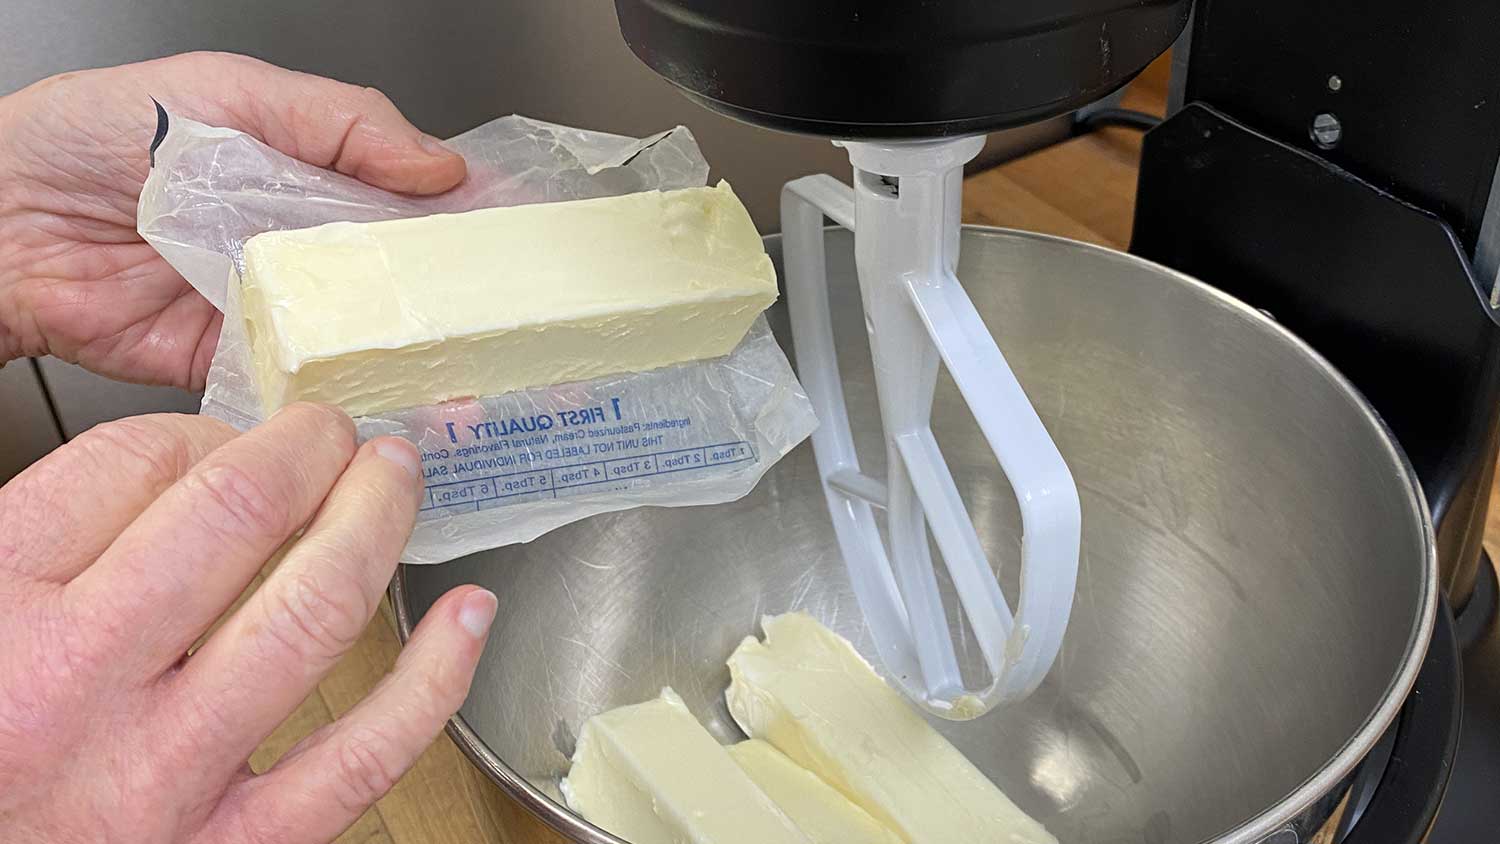 A chef unwrapping butter into a mixing bowl.